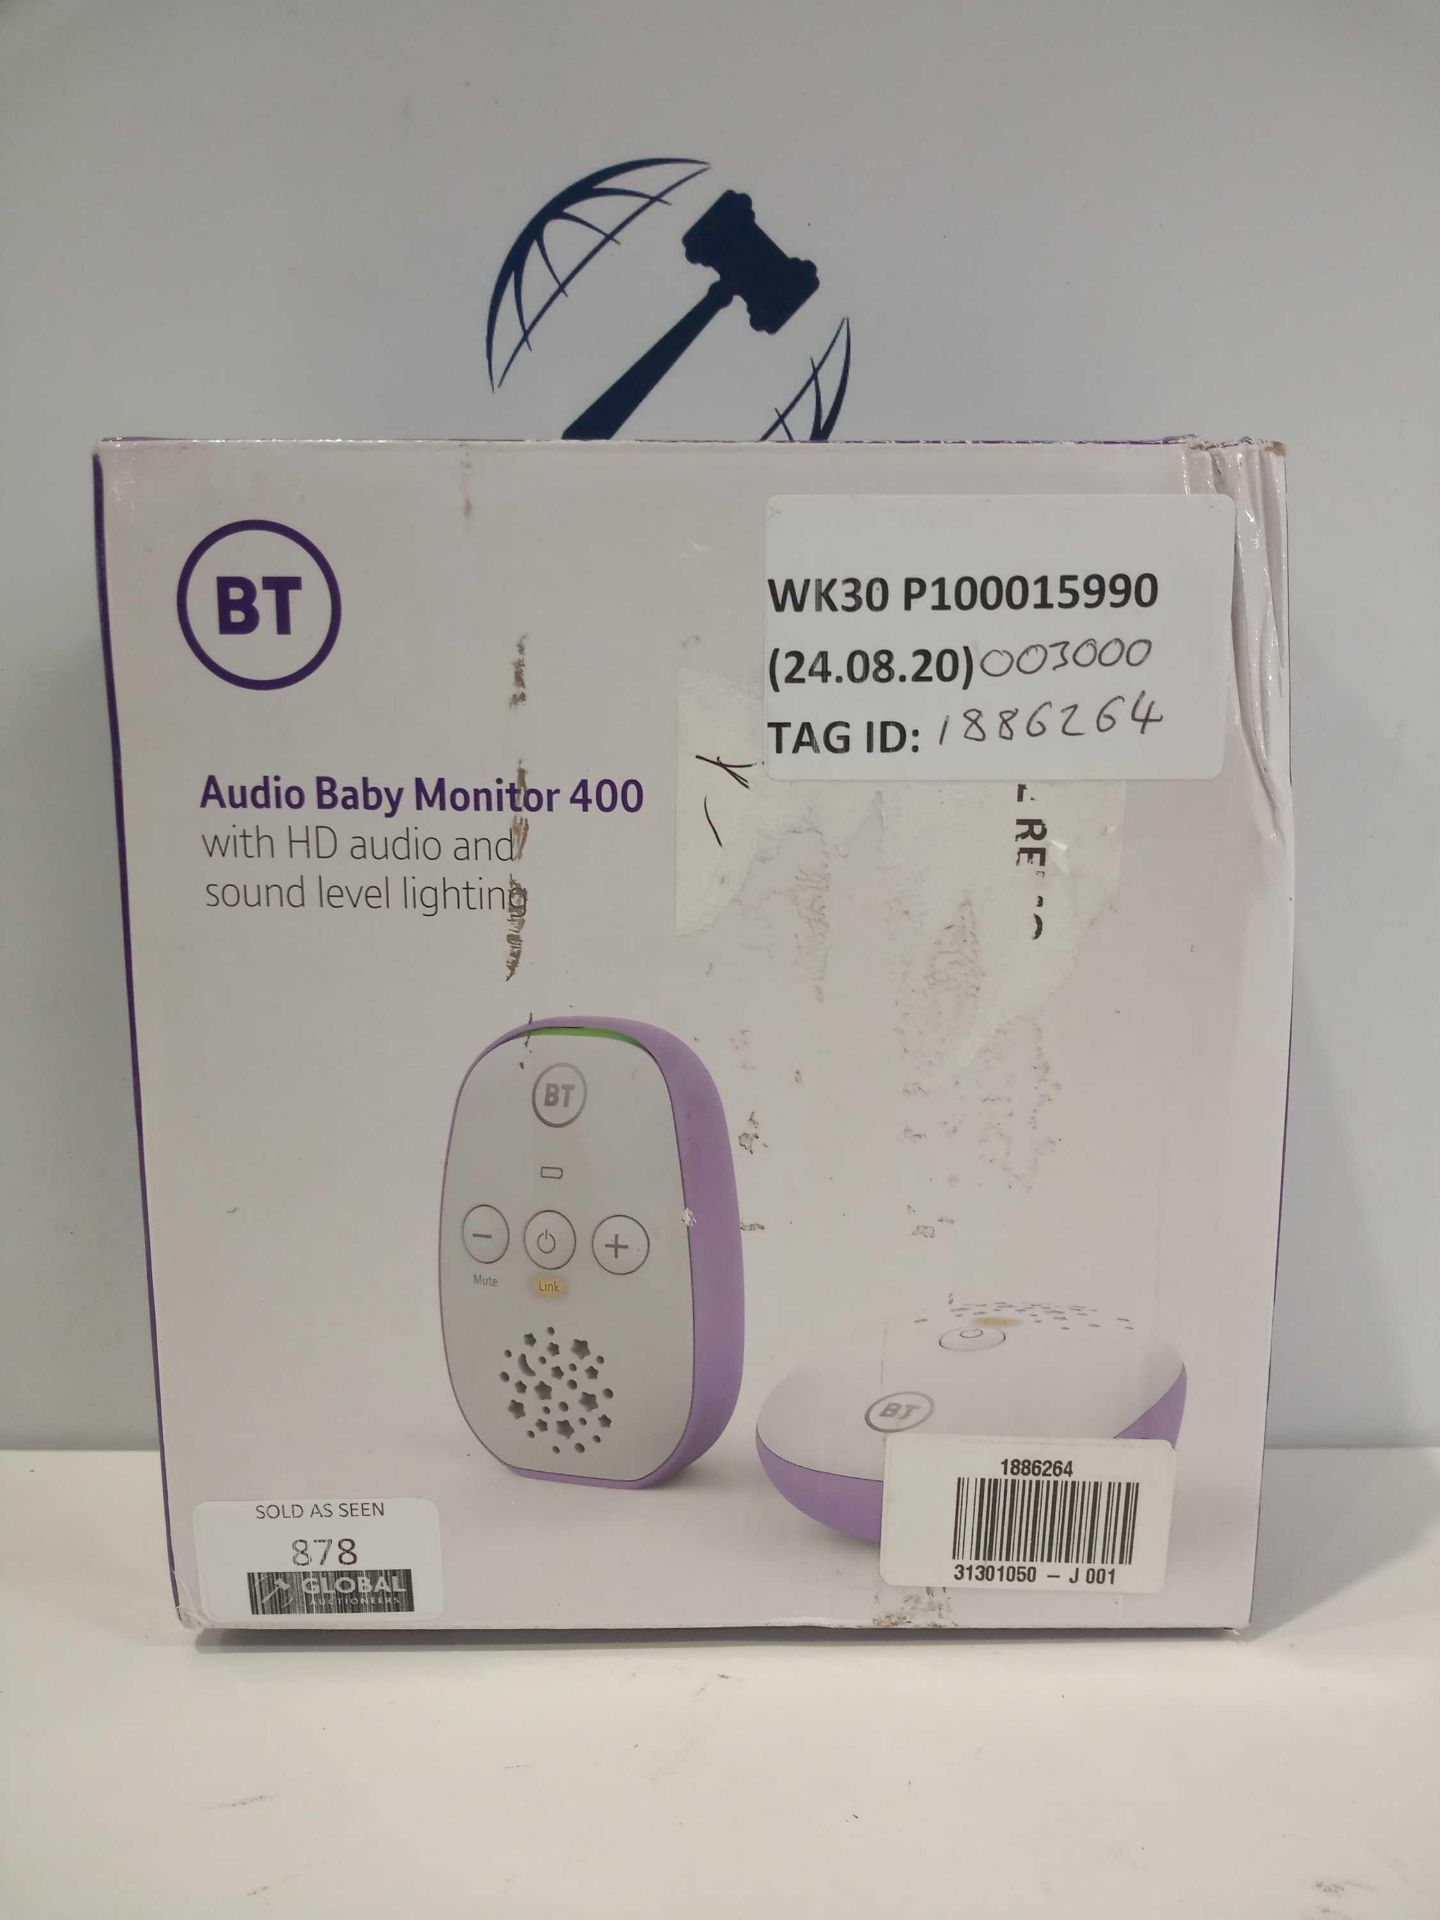 Rrp £60 Bt Audio Baby Monitor 400 With Hd Audio And Sound Level Lighting